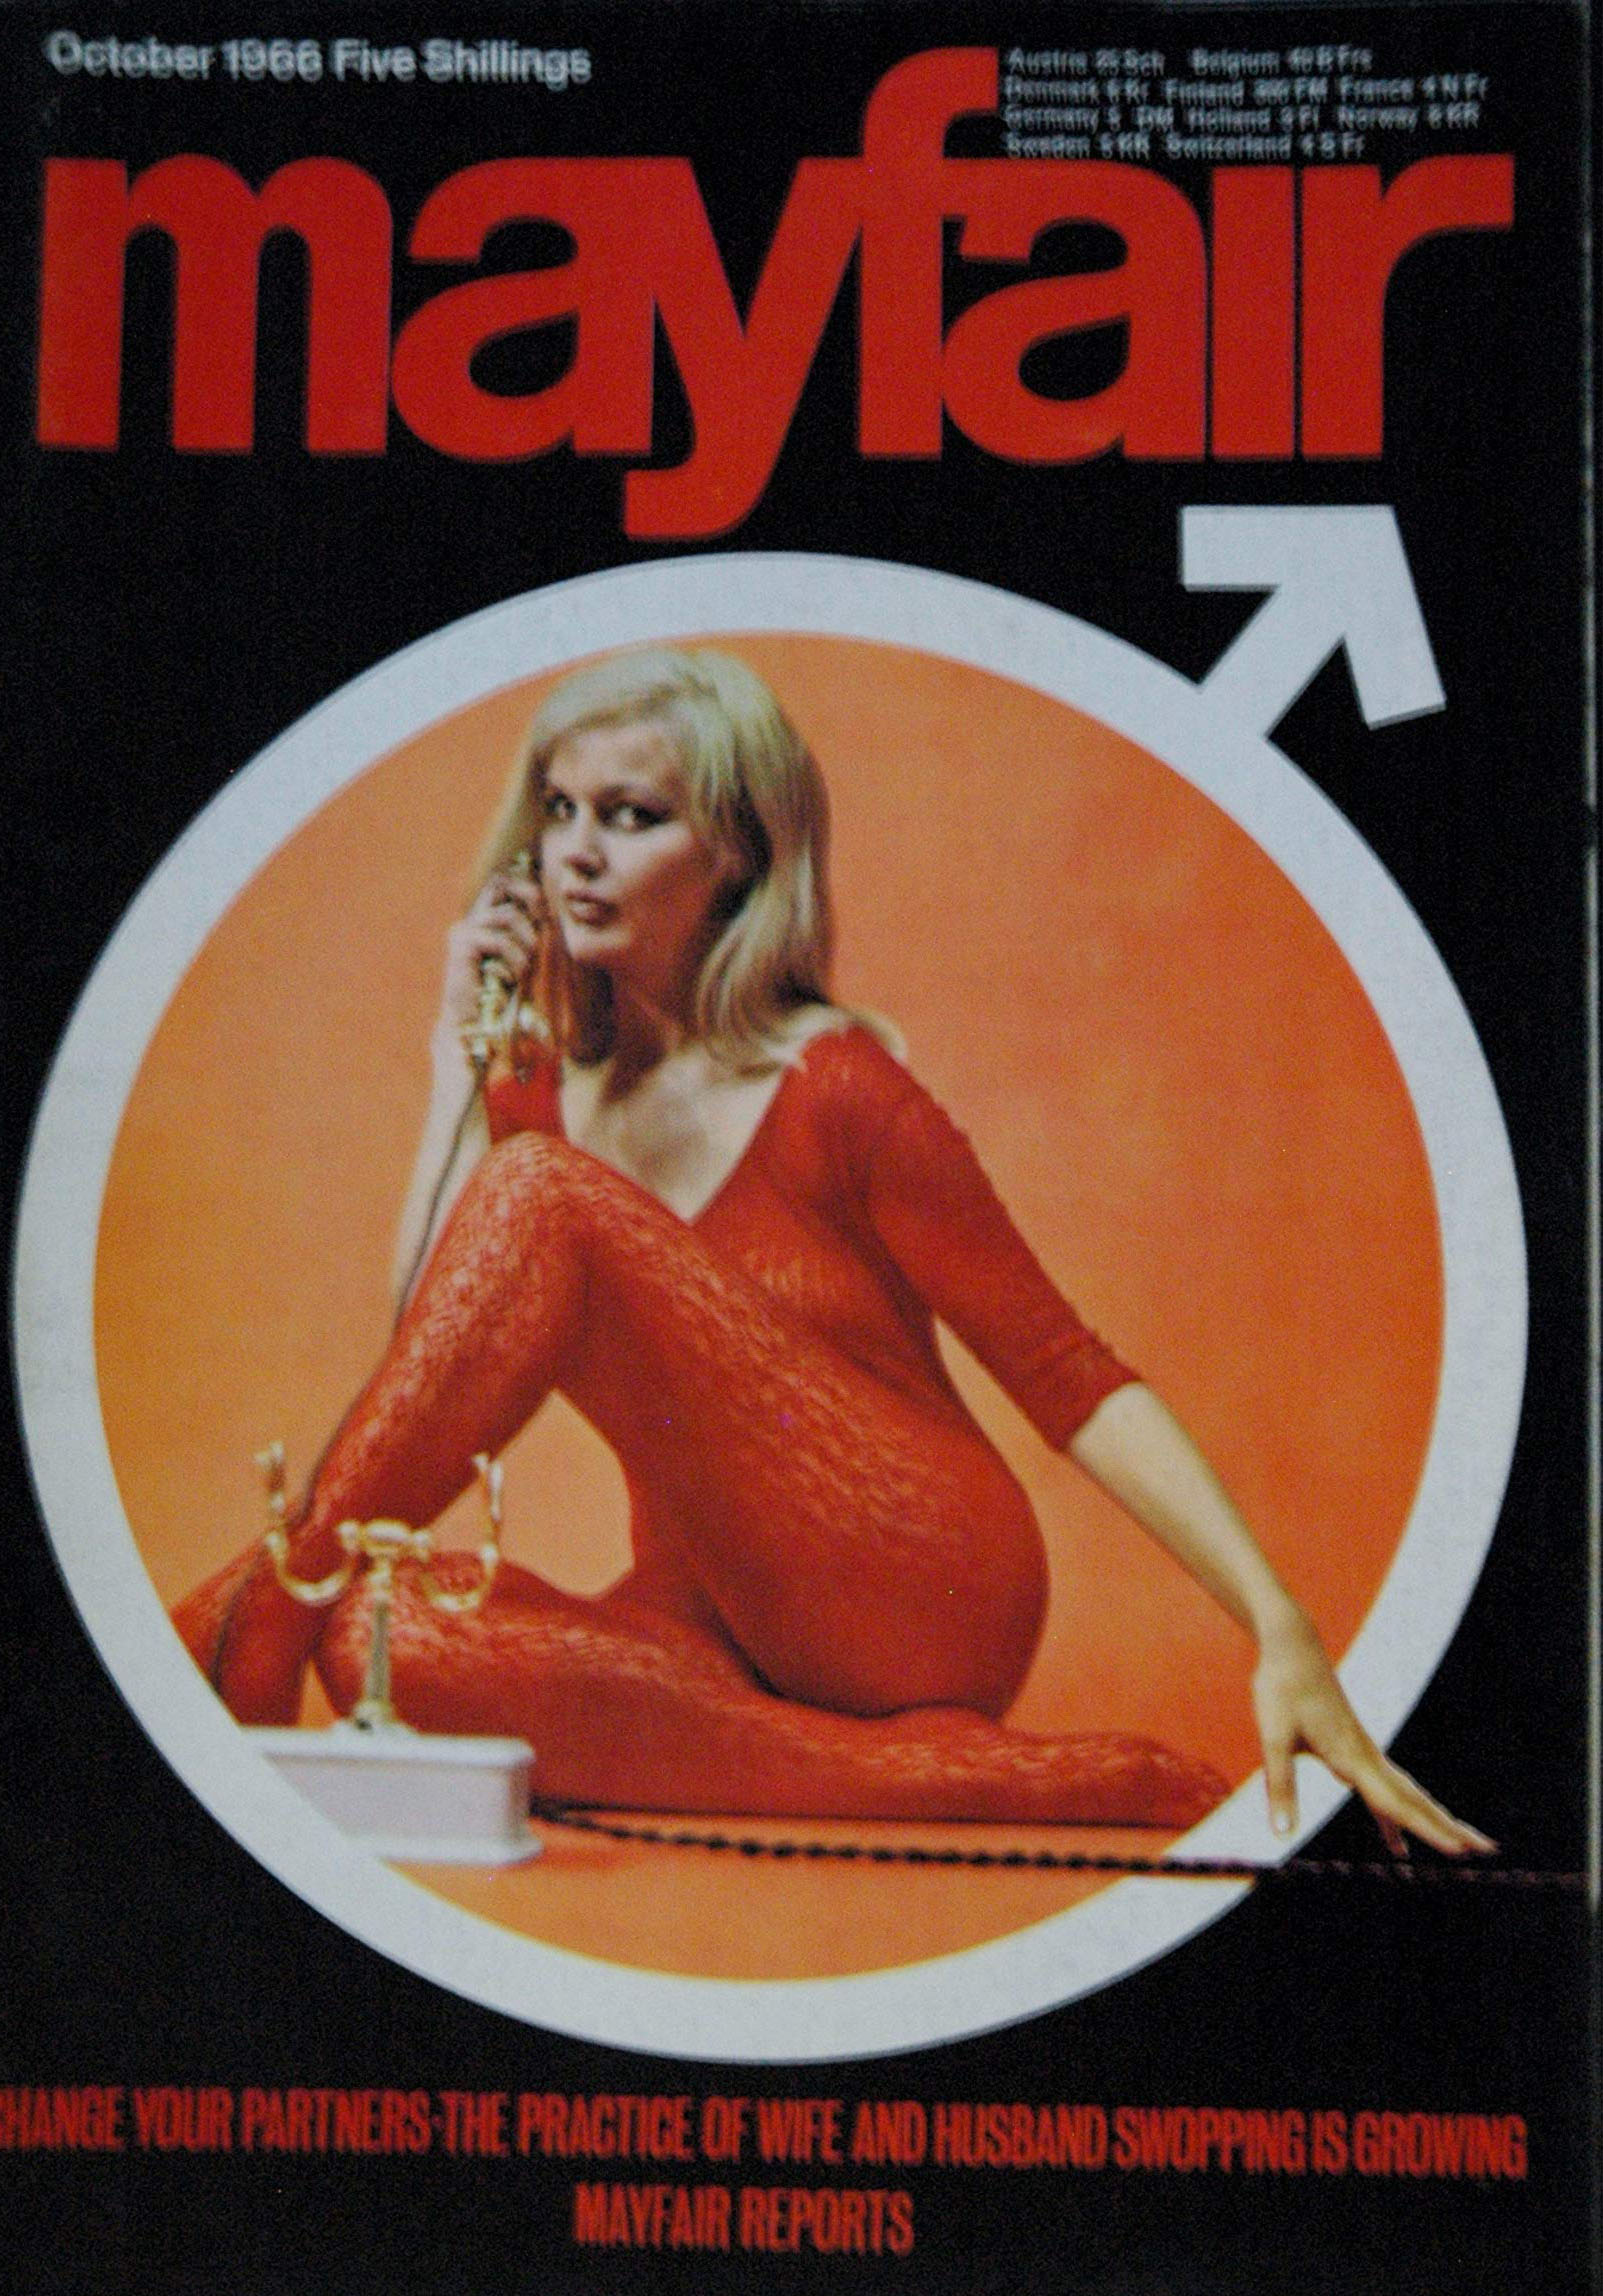 Mayfair Vol. 1 # 10 magazine back issue Mayfair magizine back copy Mayfair Vol. 1 # 10 Vintage Adult Magazine Back Issue Published by Paul Raymond Publishing Group. October 1966 Five Shillings.